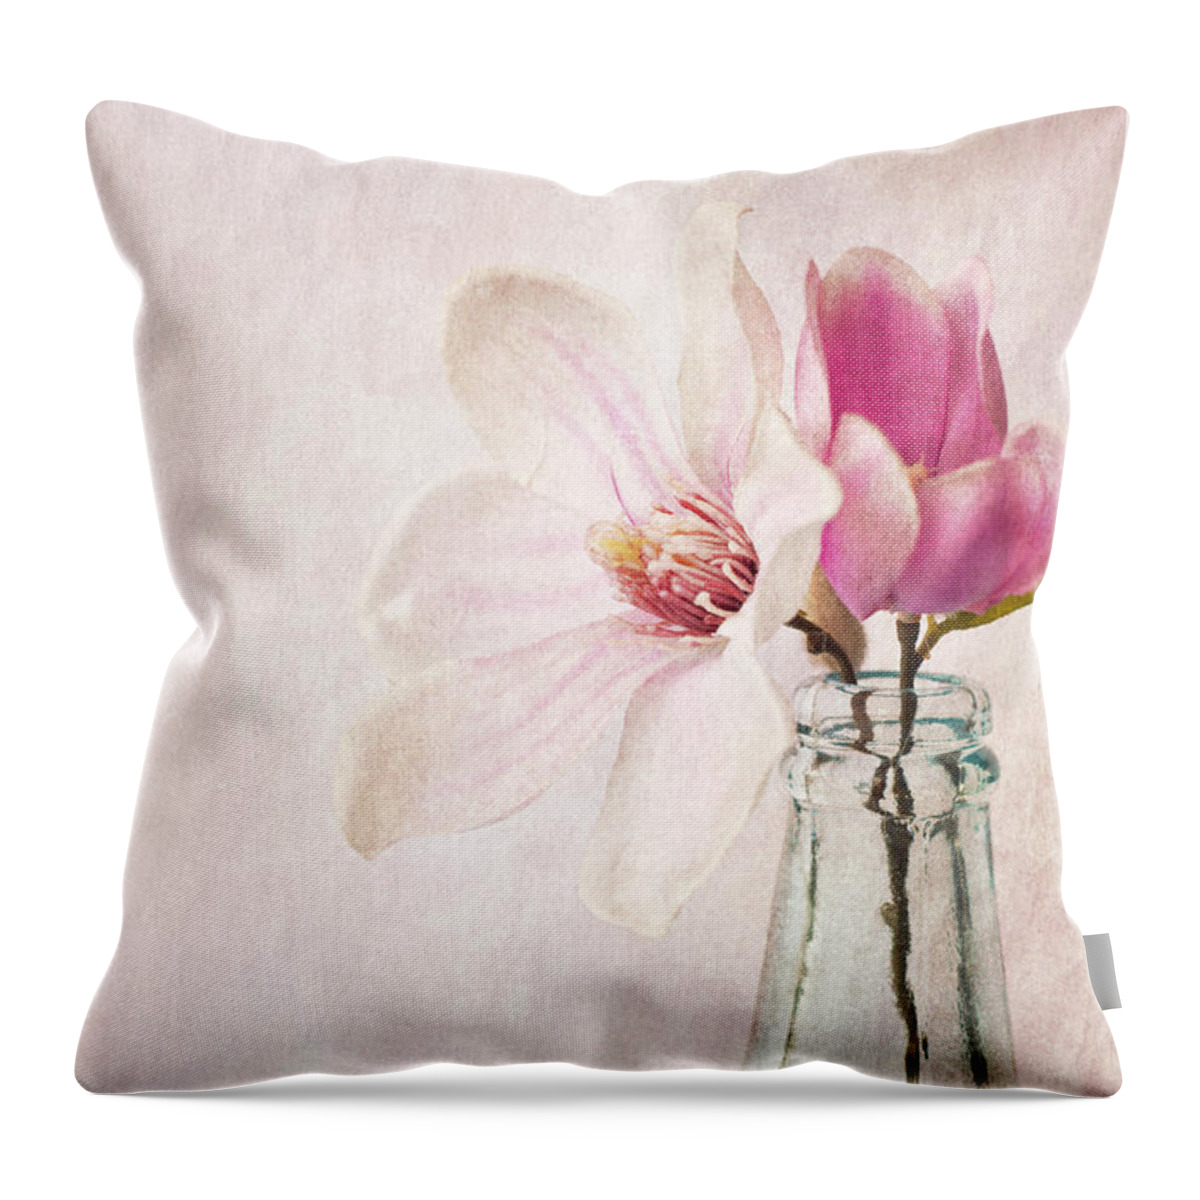 Flowers Throw Pillow featuring the photograph Flowers in a Bottle by David Lichtneker